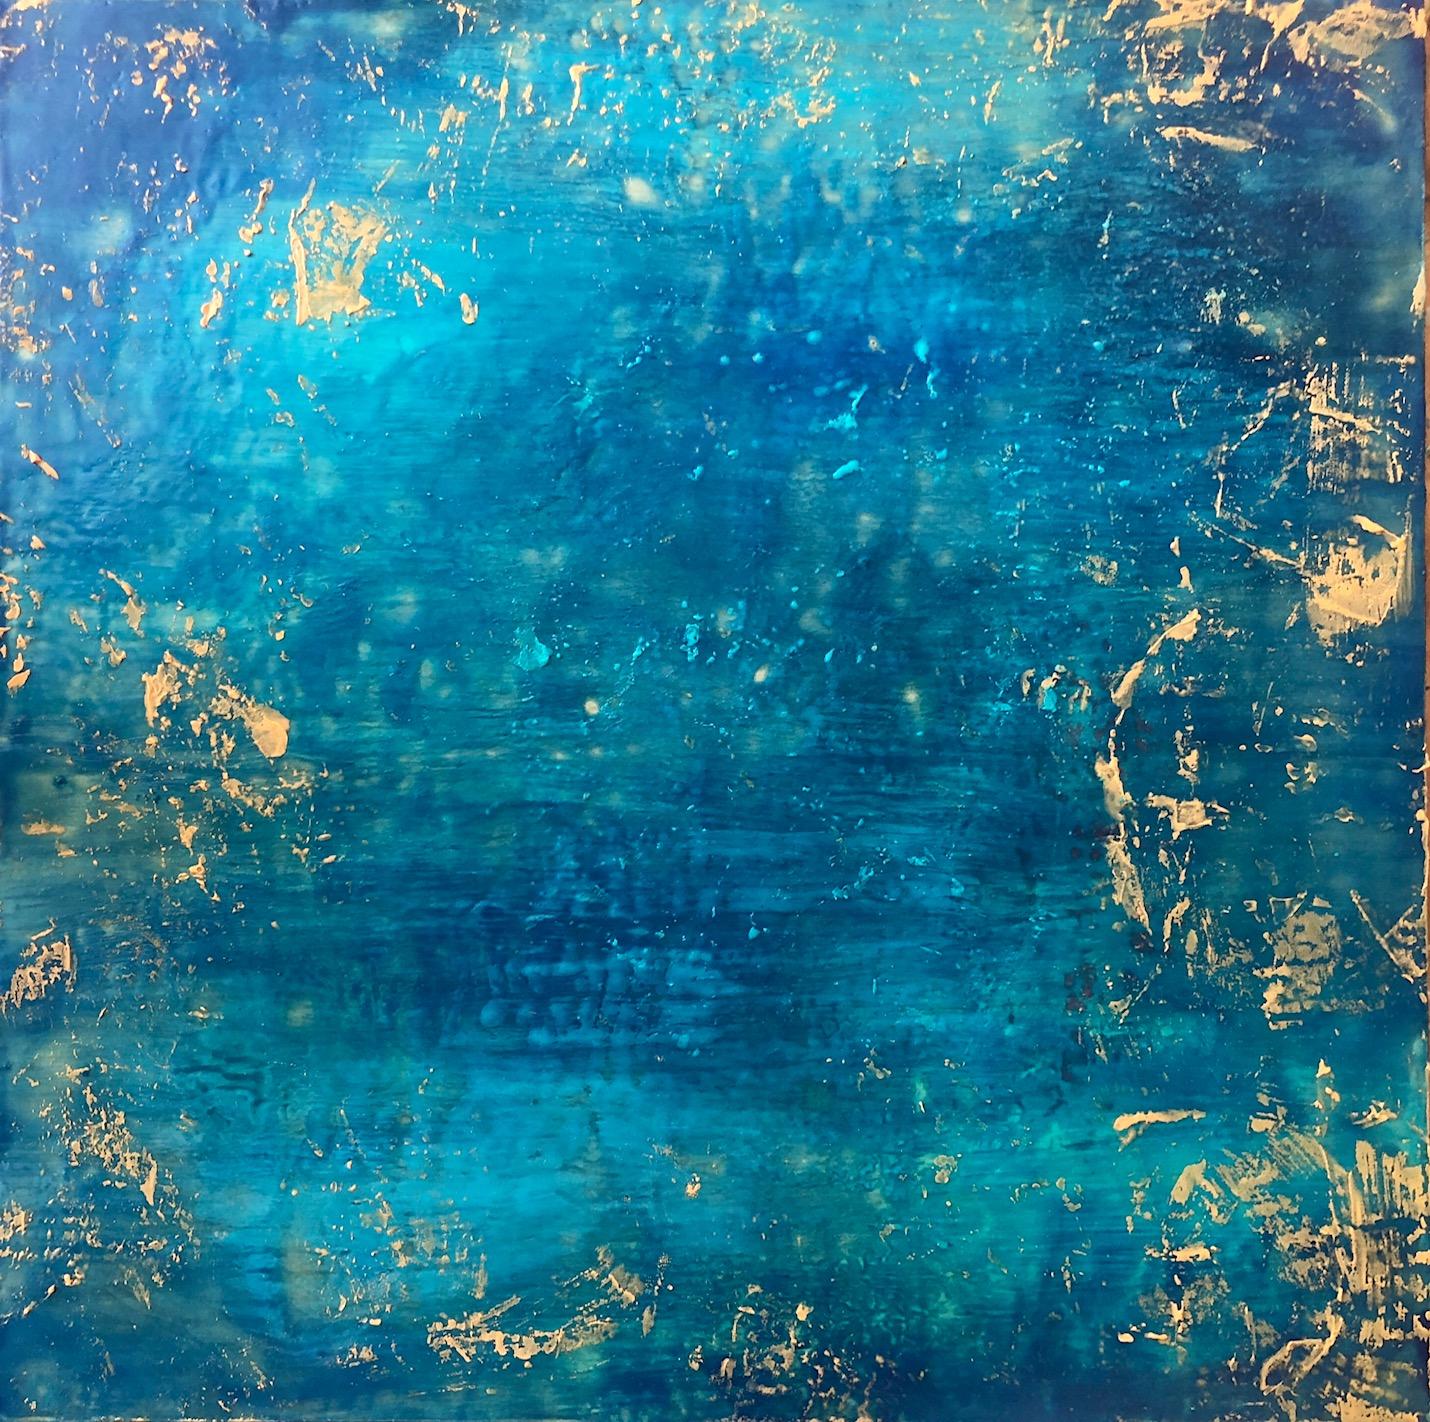 Linda Frueh Landscape Painting - Beauty in Isolation - Rich Abstract Encaustic Painting - Water Ocean Blue + Teal